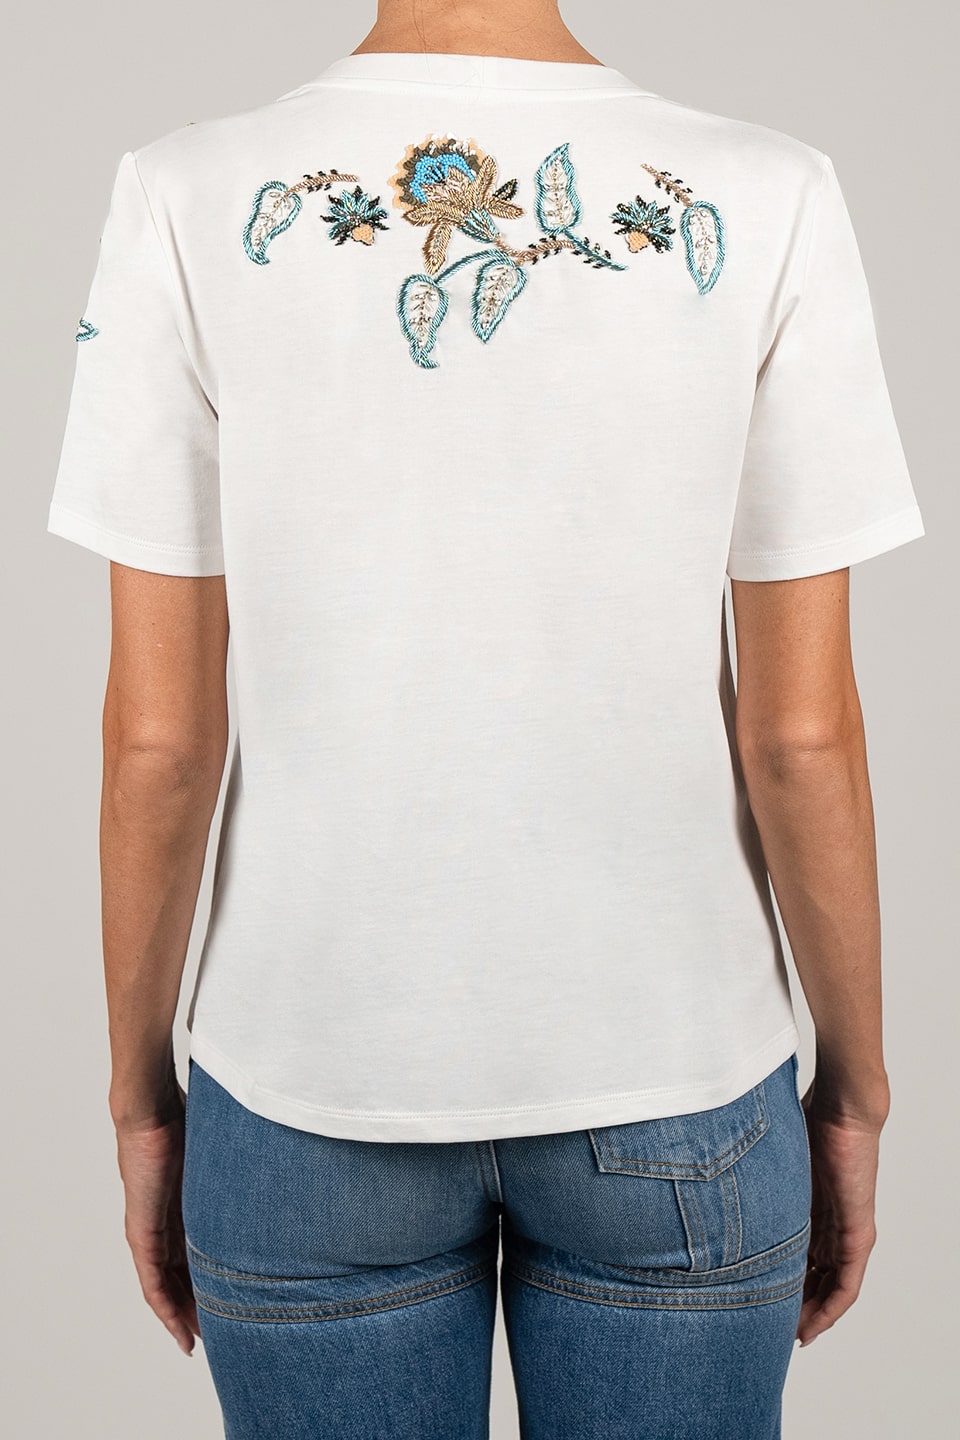 Designer White T-shirt, shop online with free delivery in UAE. Product gallery 3